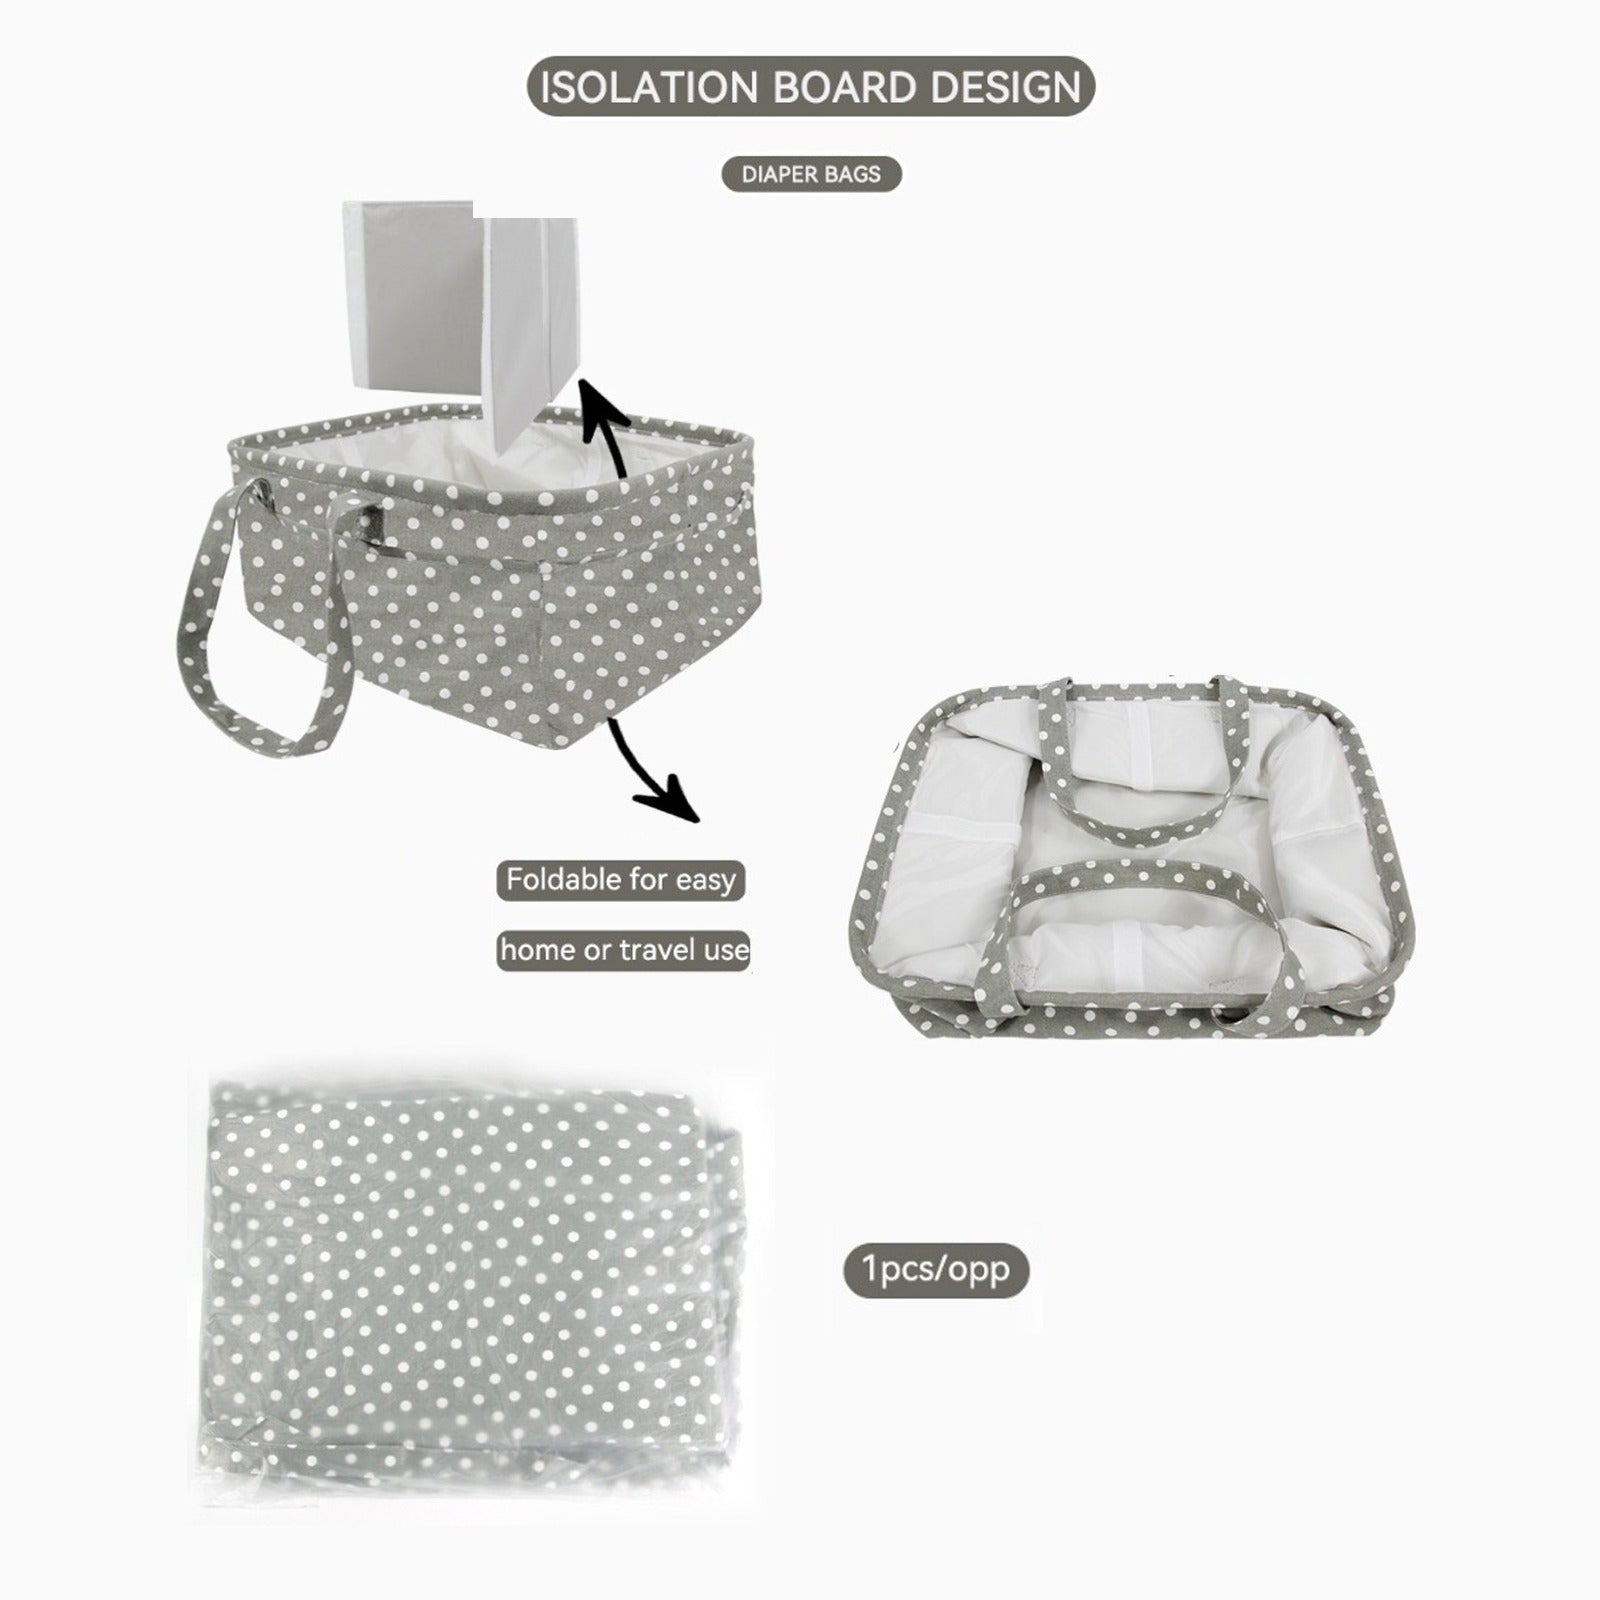 Image shows the flexibilty of Baby Diaper Caddy Bag 